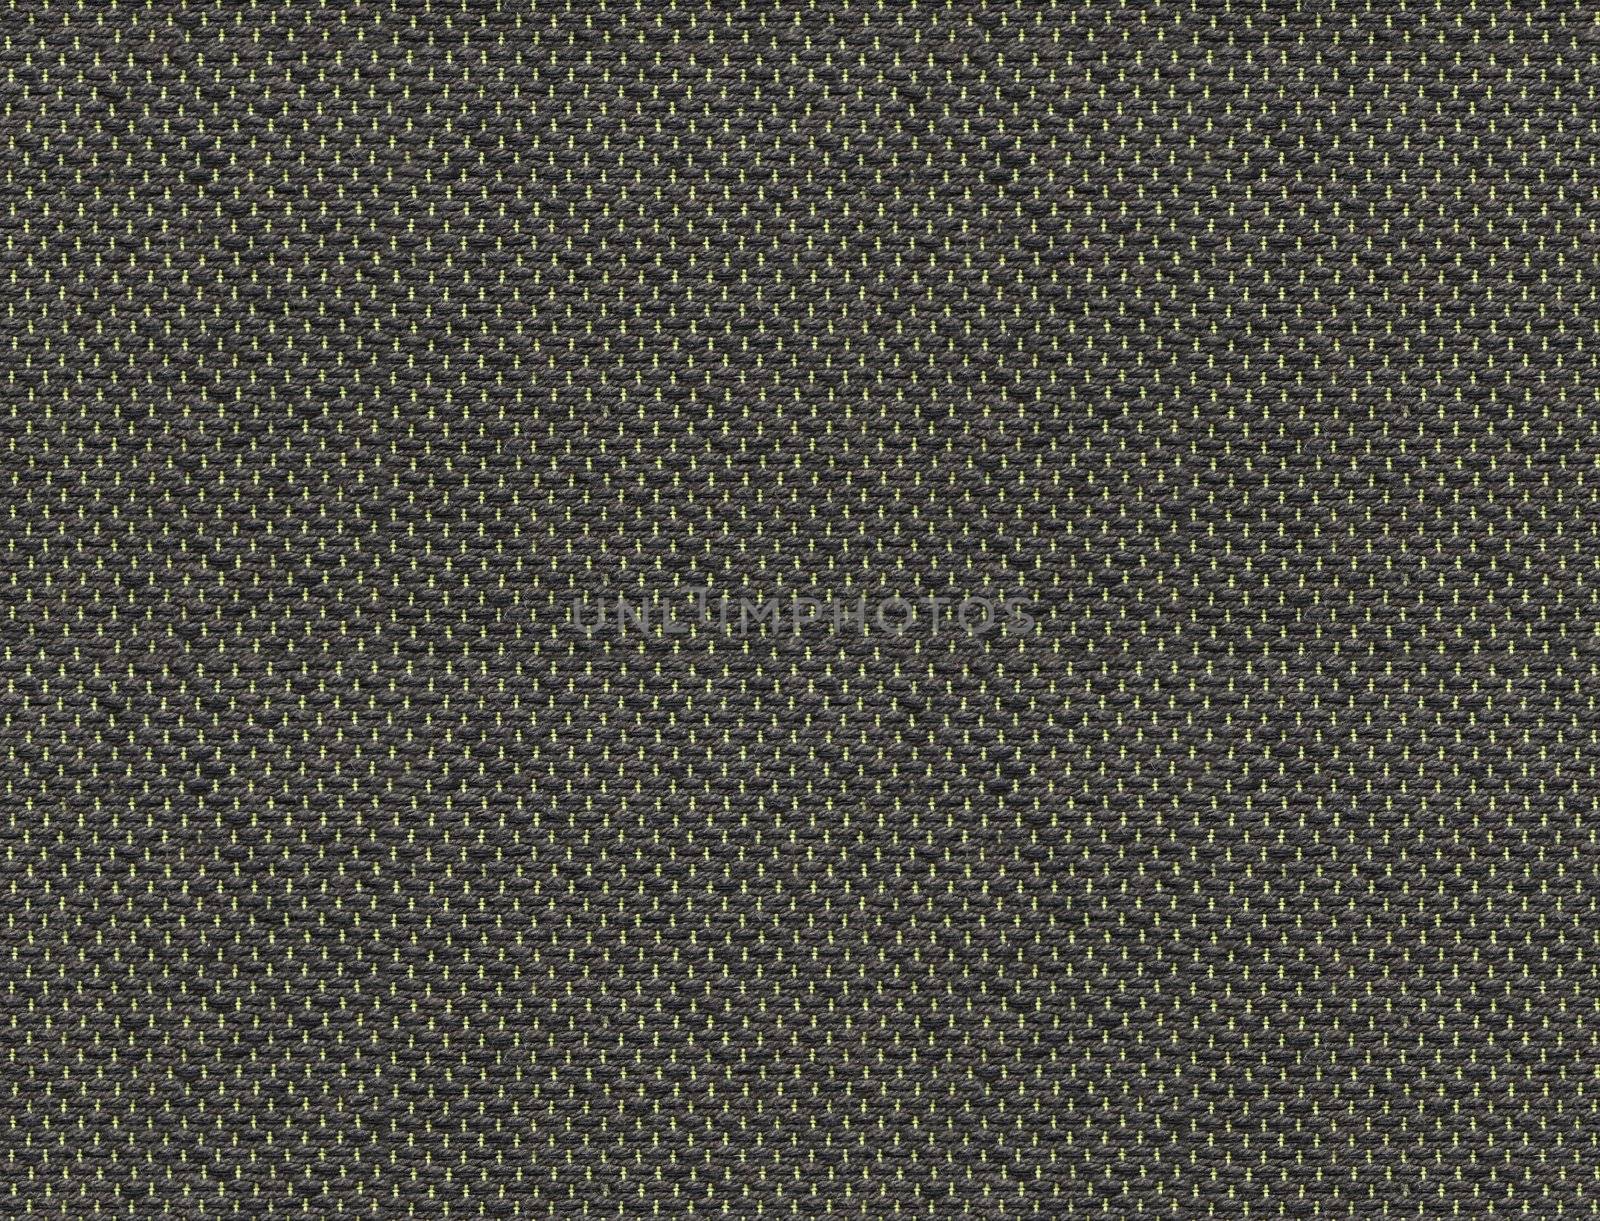 Dark fabric texture that perfectly loop horizontally and vertically